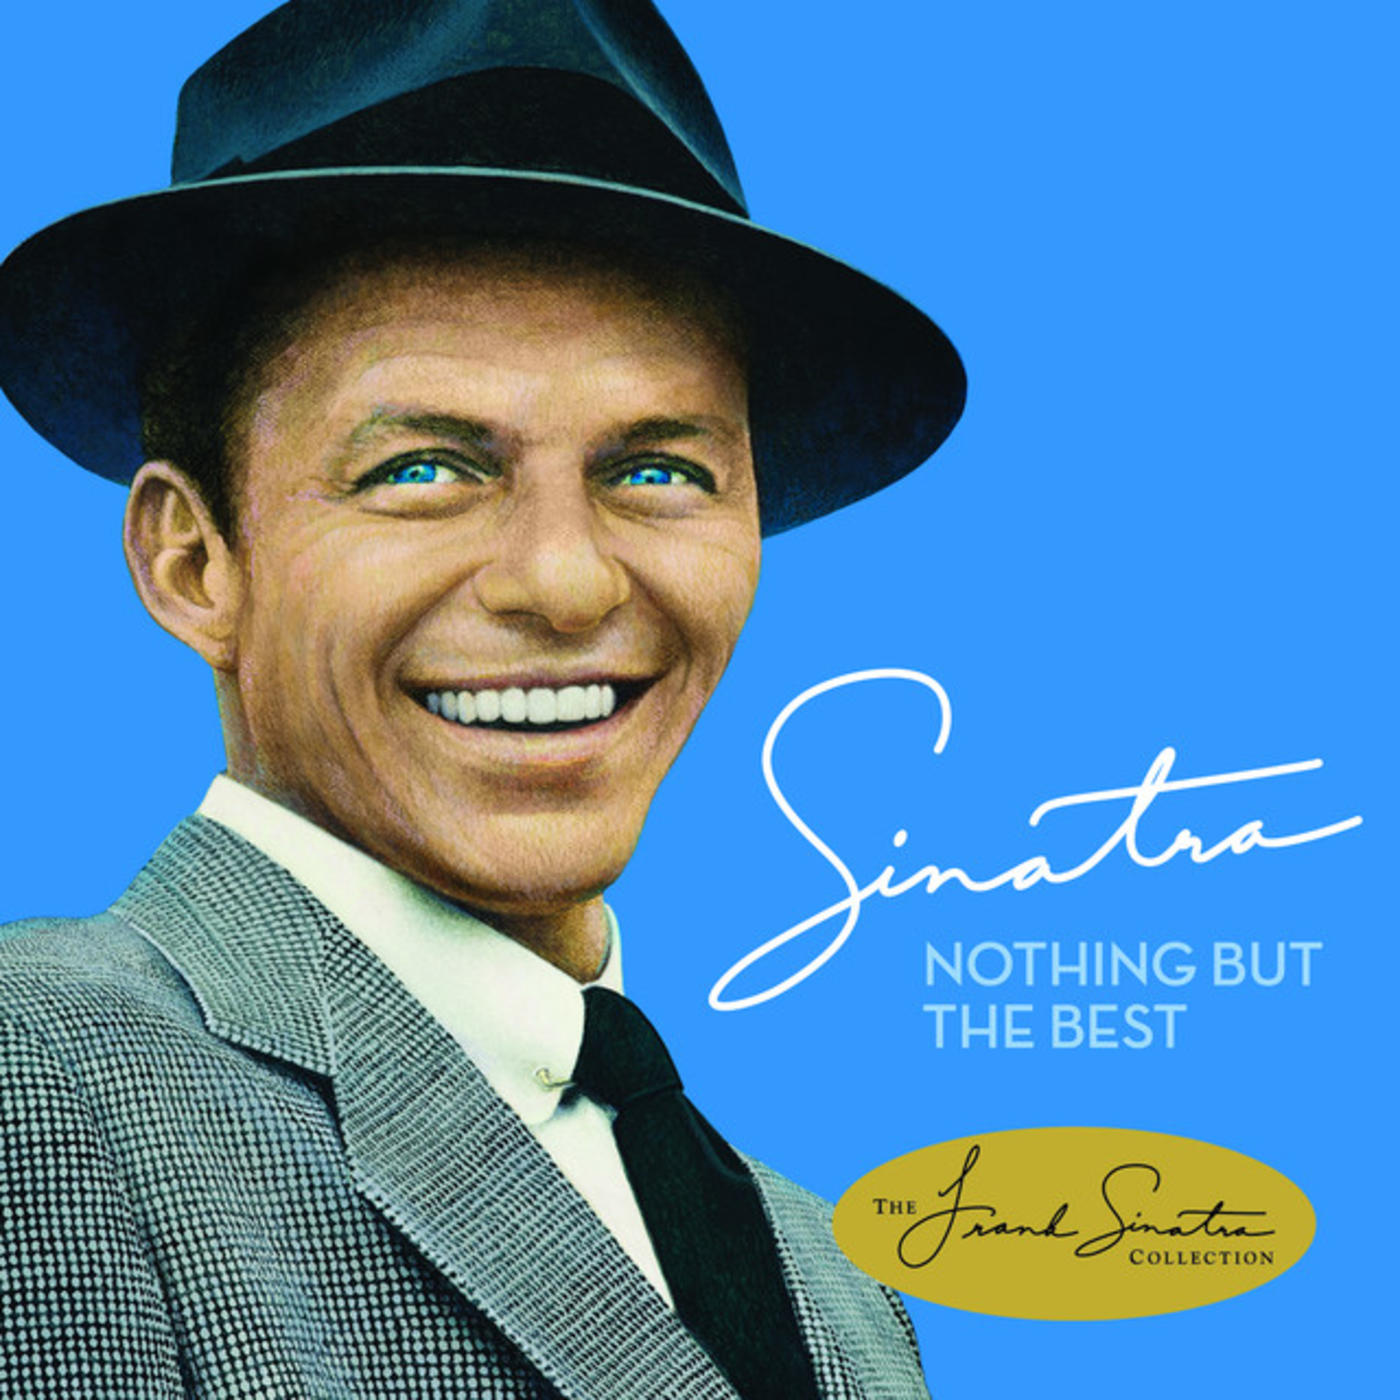 Nothing But The Best [The Frank Sinatra Collection]